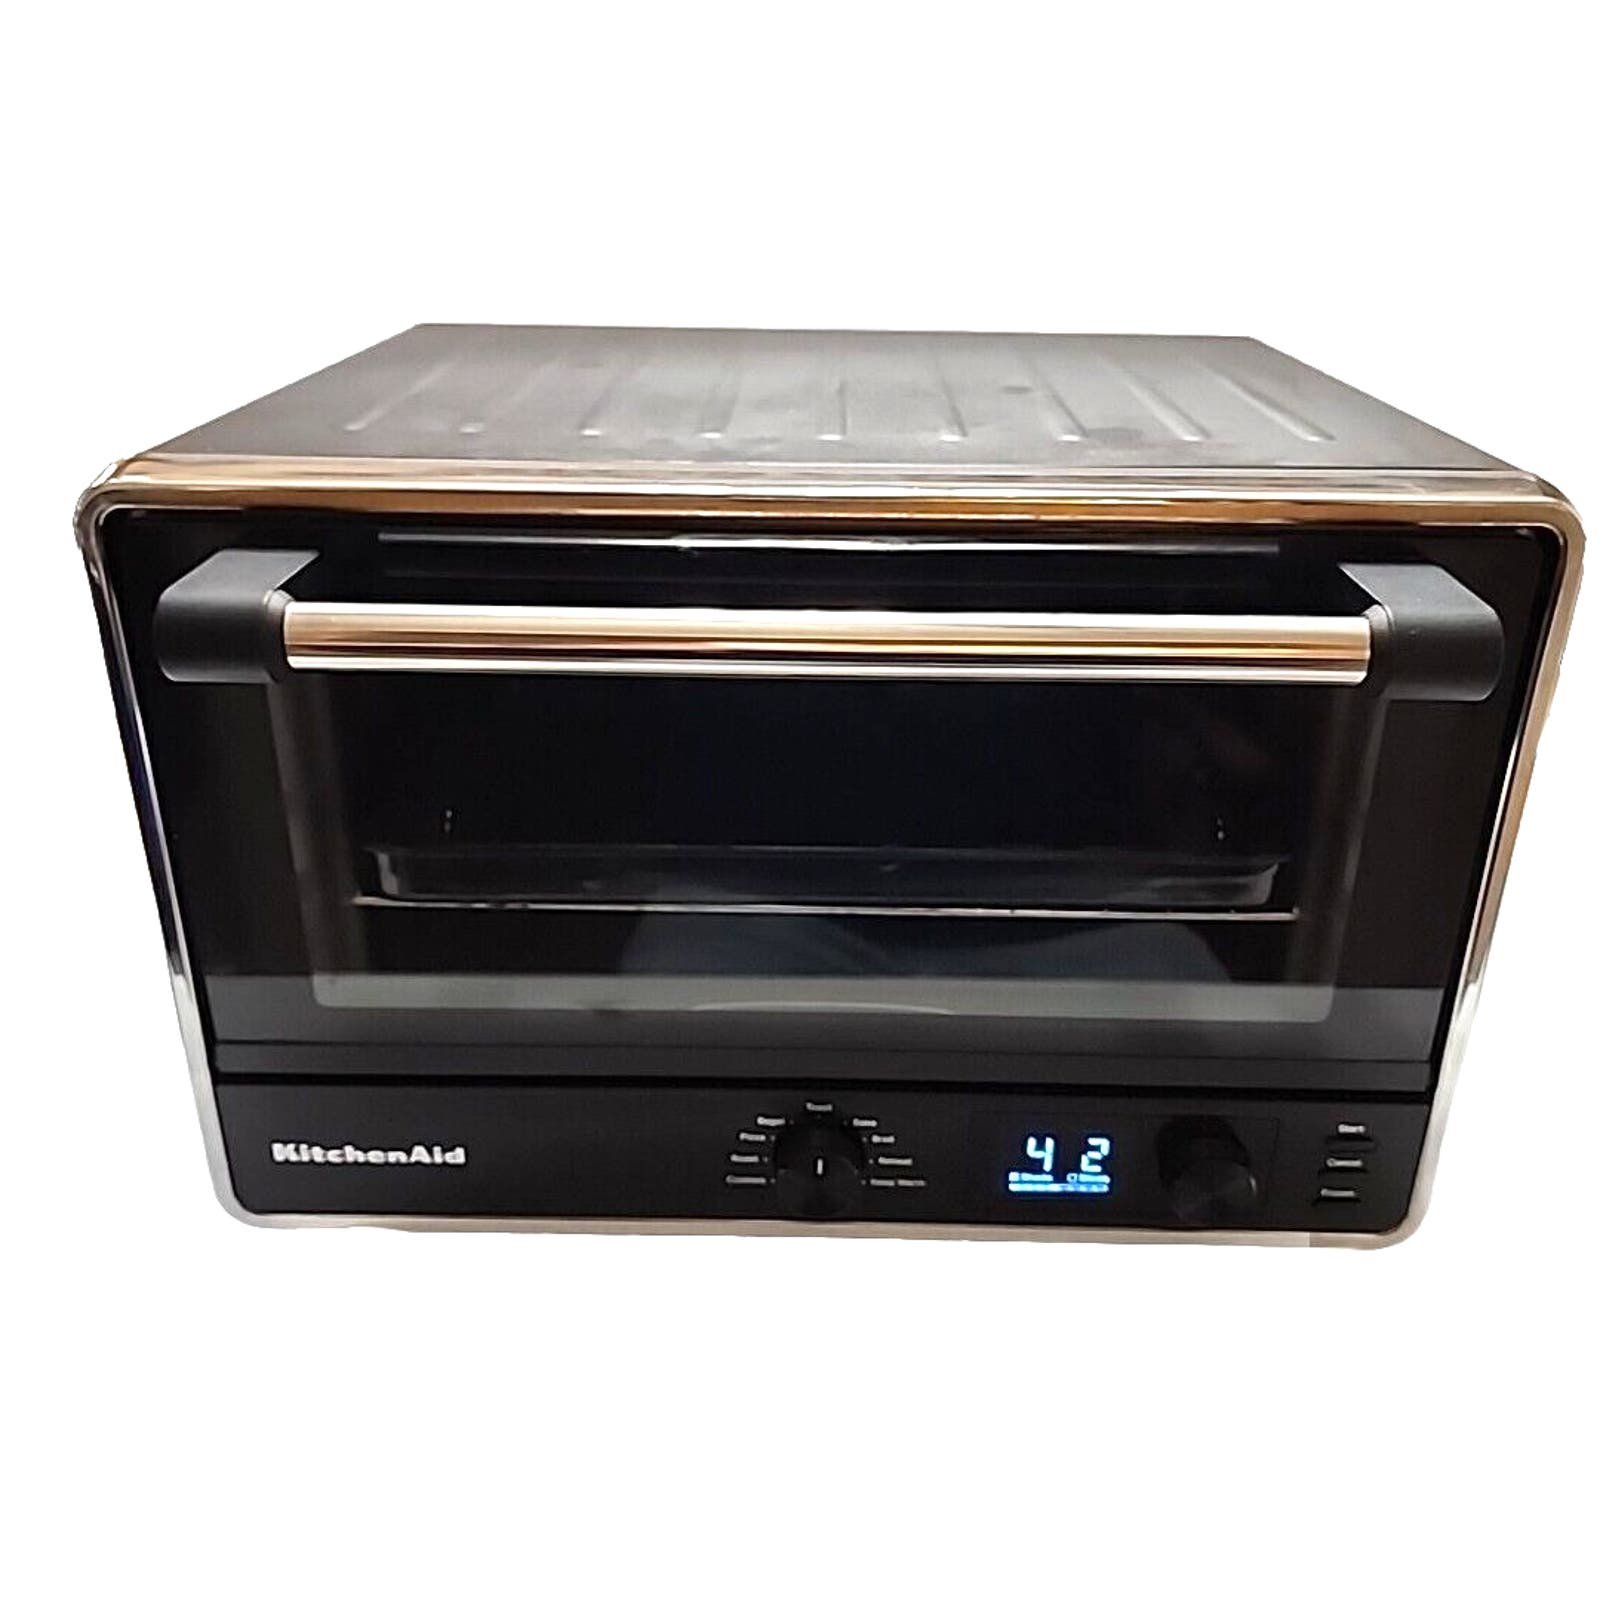 KitchenAid KCO211 Digital Countertop Toaster Oven Black Matte Tested and Works C0qiWywL8